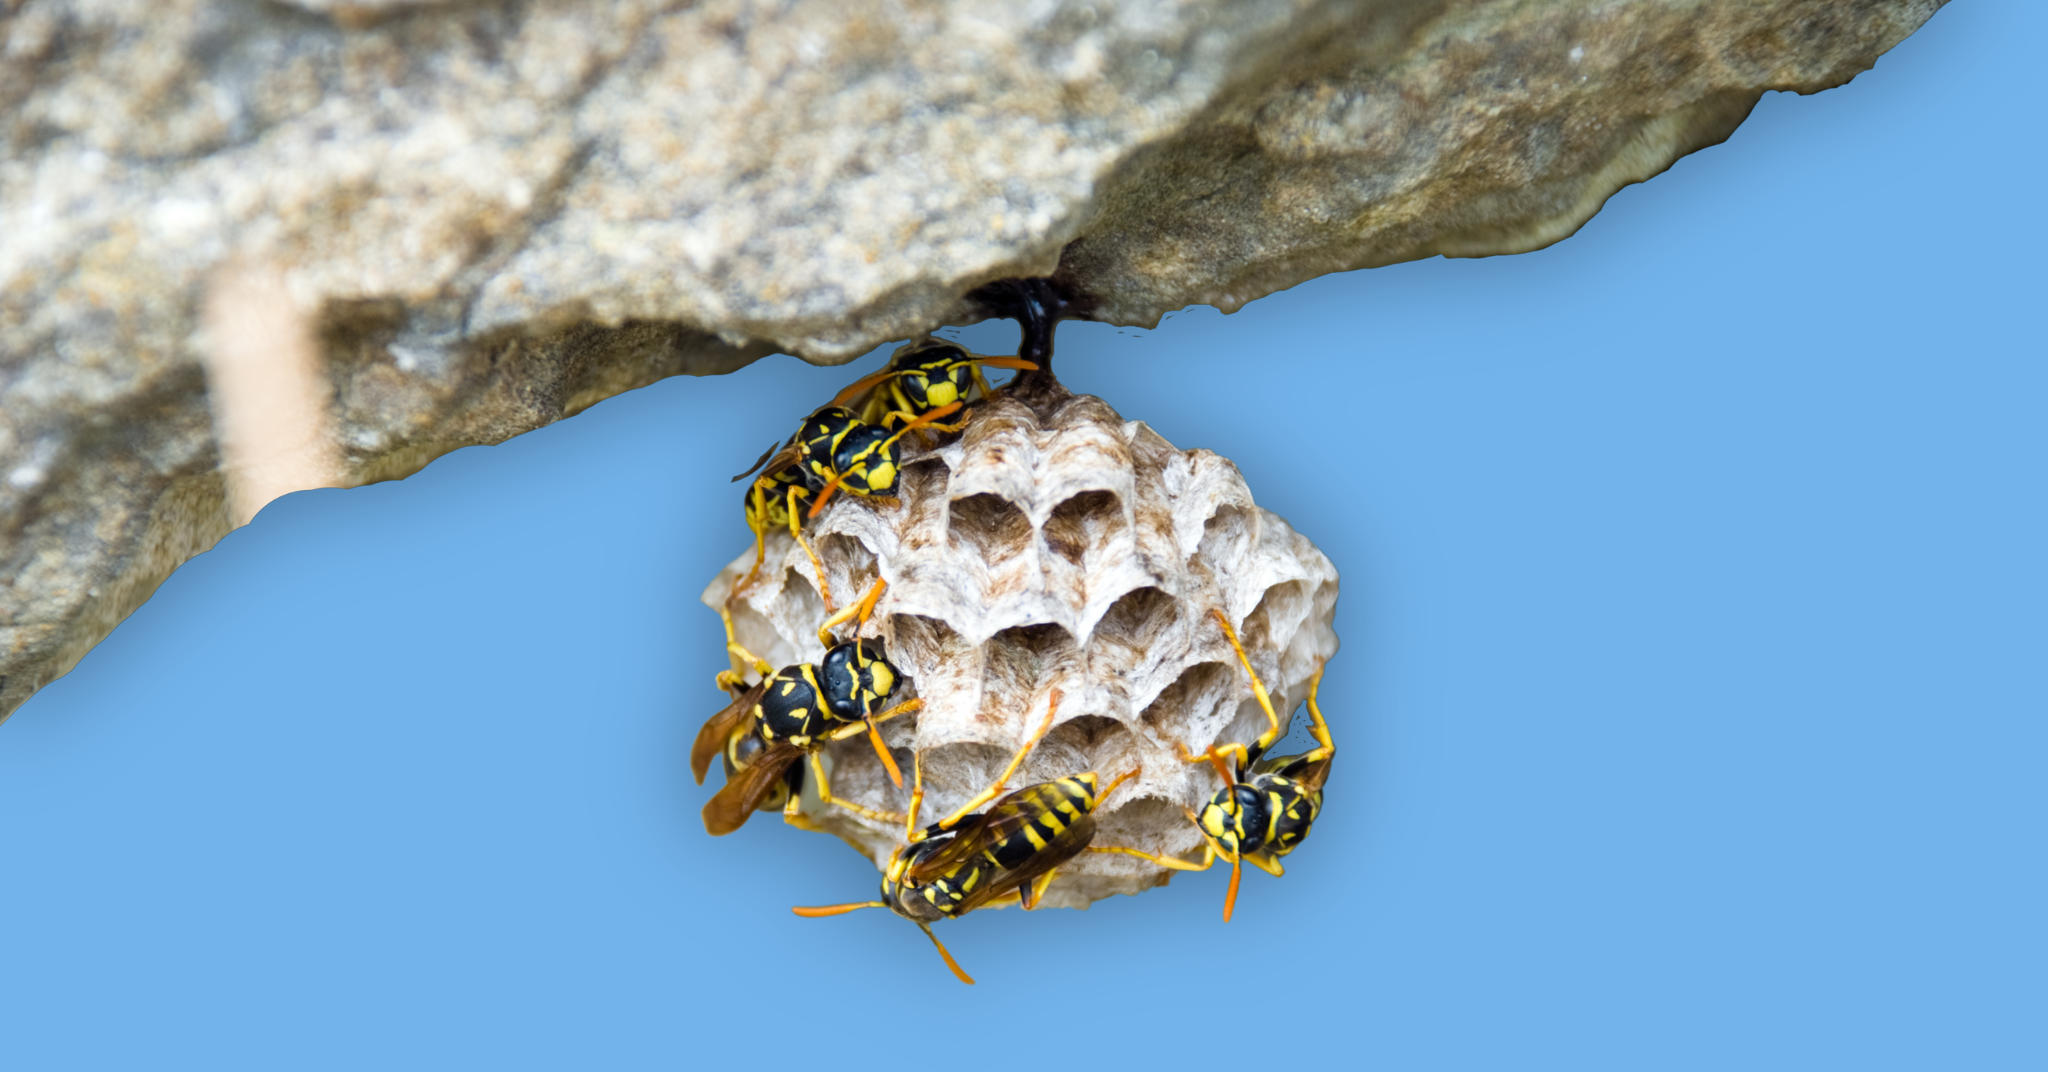 How to Identify and Remove a Wasp Nest